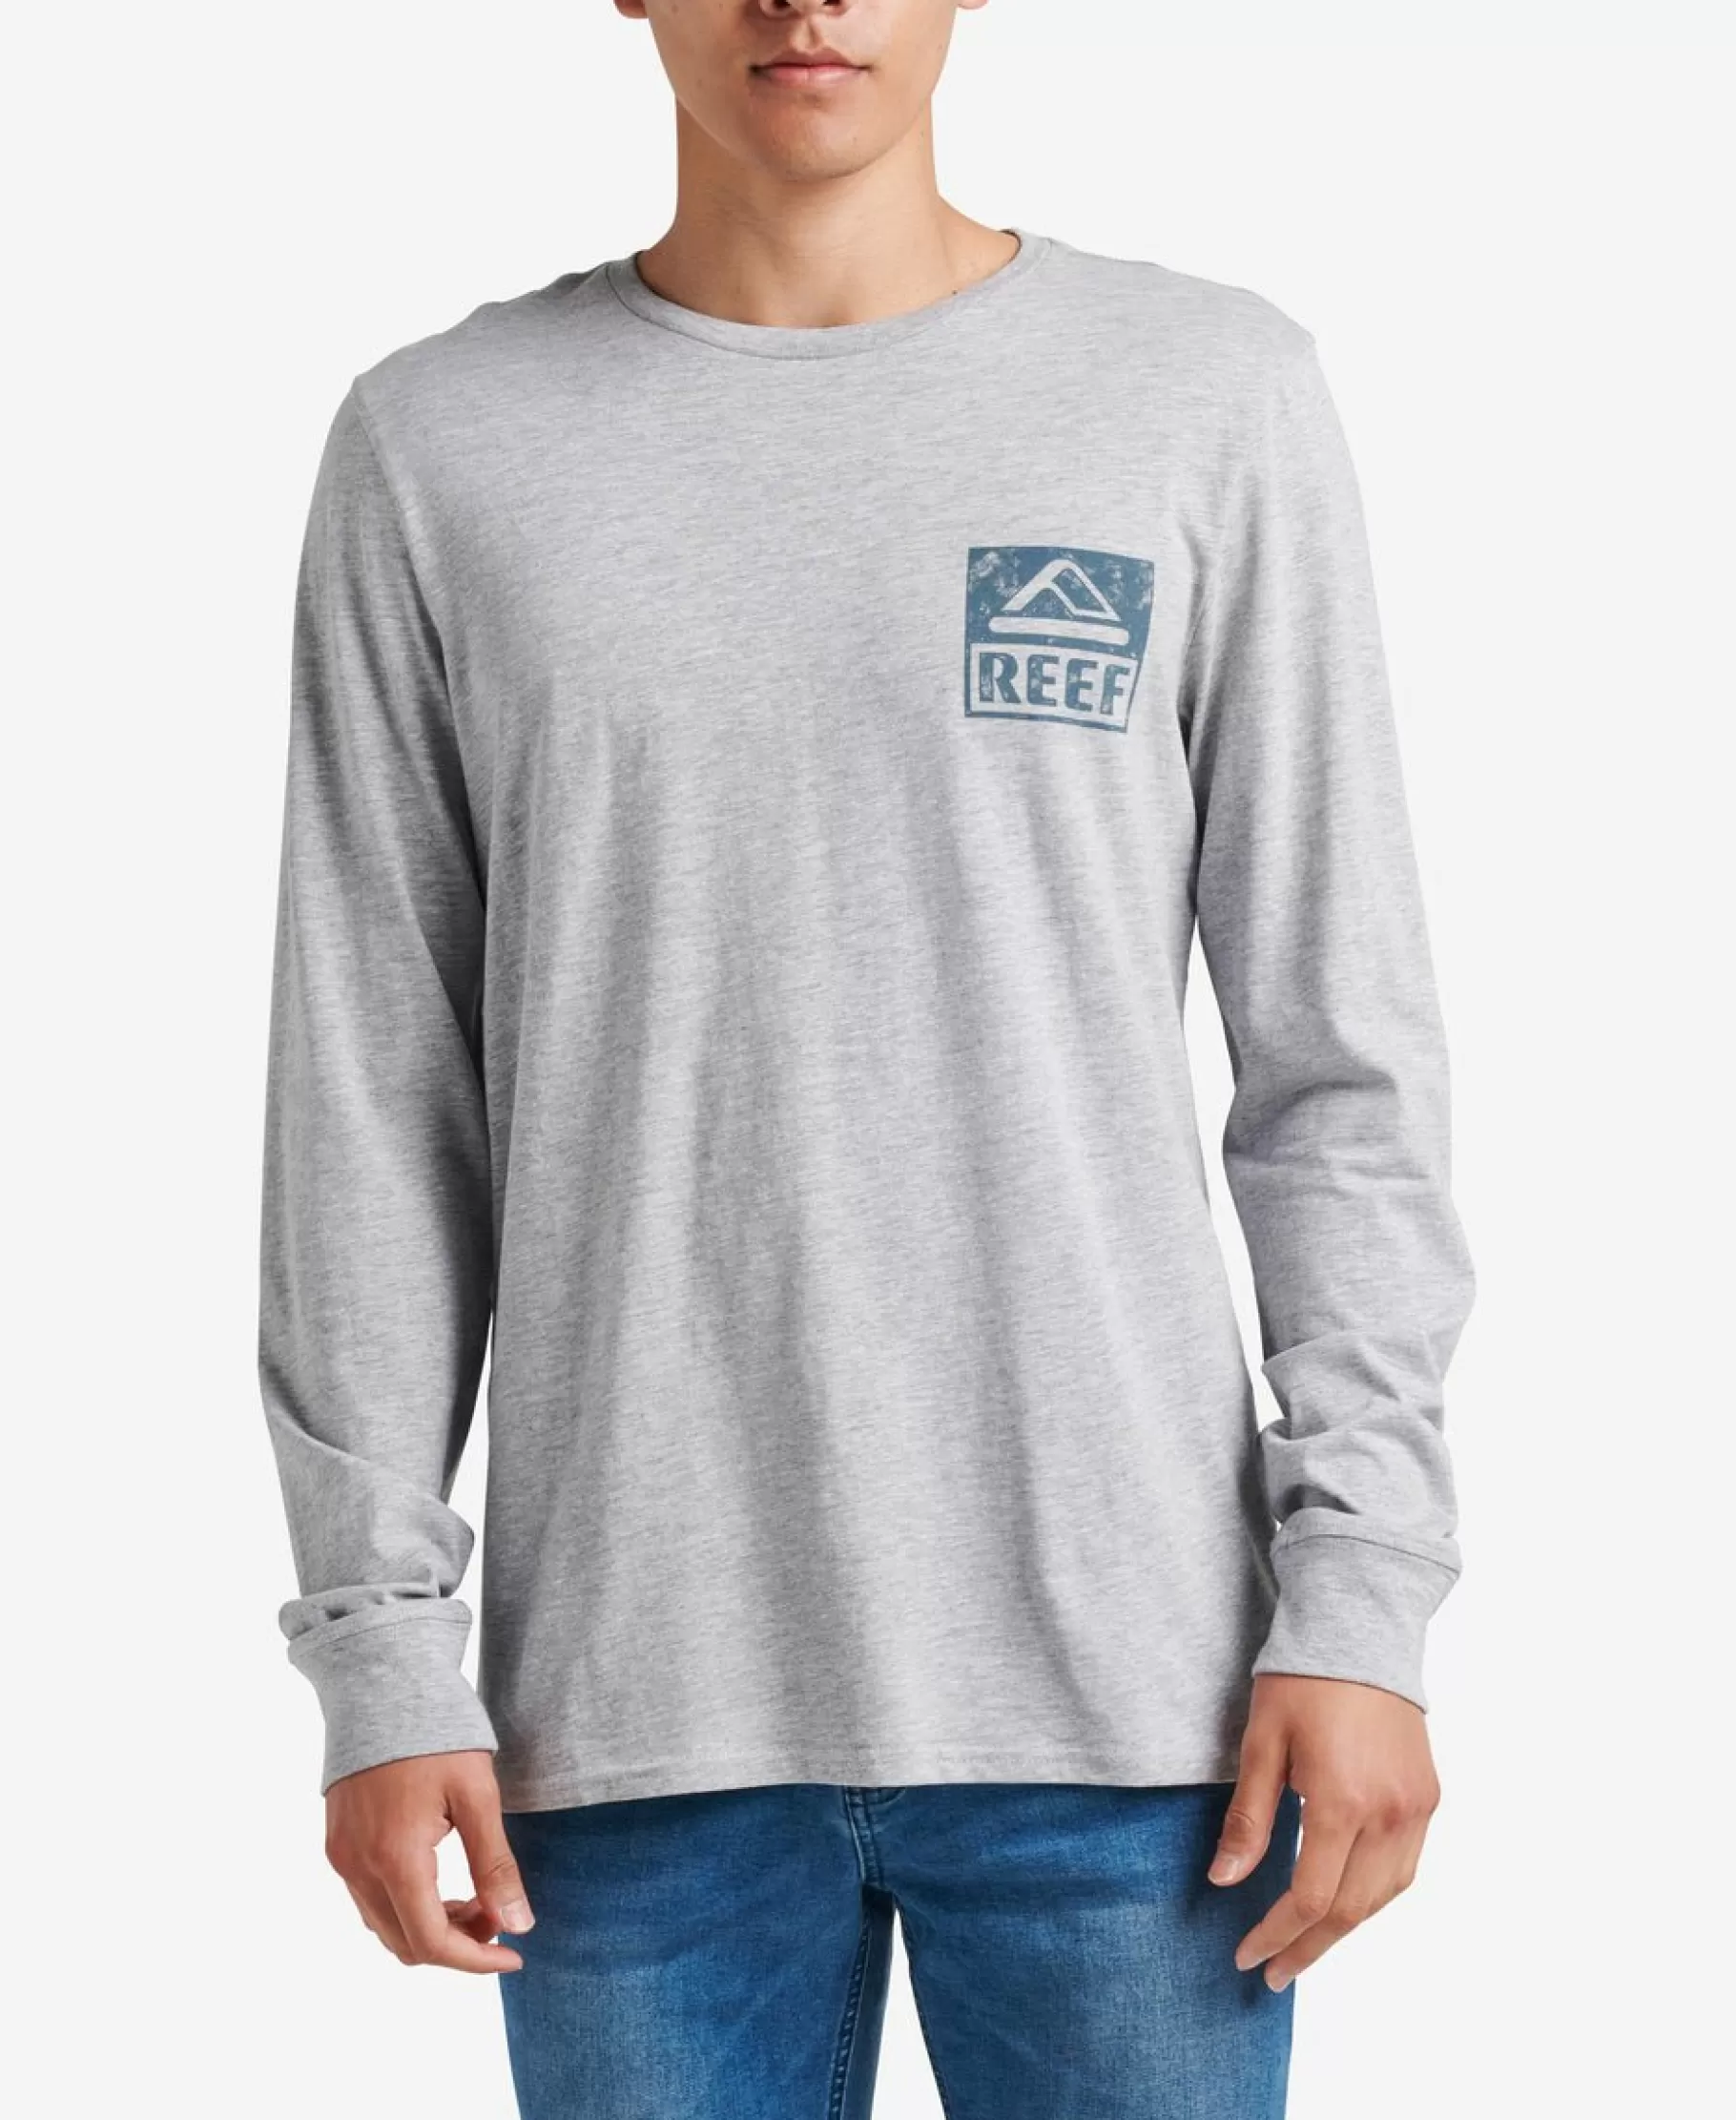 Men REEF T-Shirts>Wellie Graphic Long Sleeve Tee